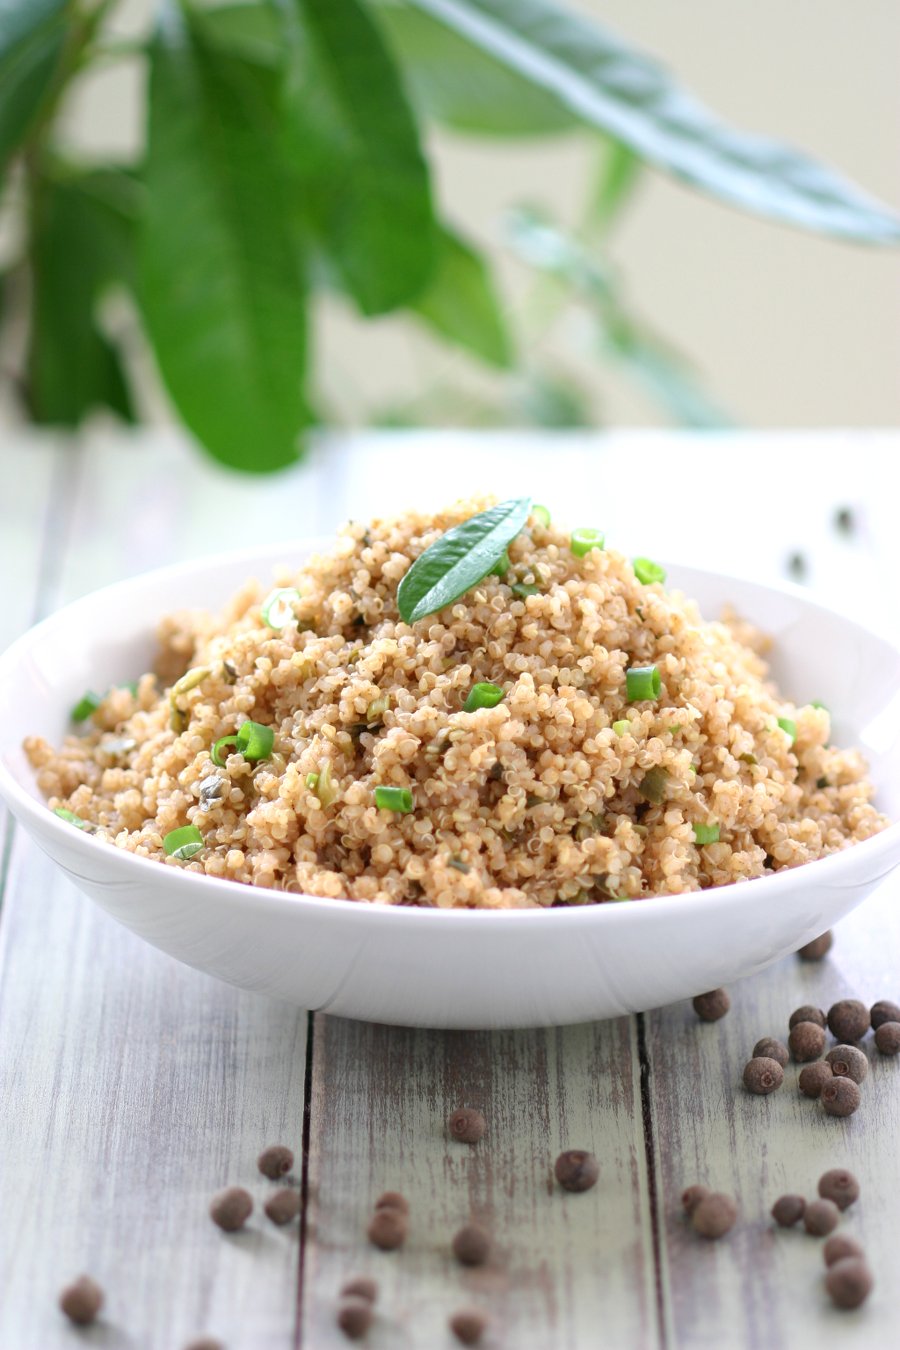 This Jamaican Jerk Quinoa combines chiles, allspice, nutmeg, cloves, and ginger for that spicy Jamaican taste. Great for making quinoa bowls, too!